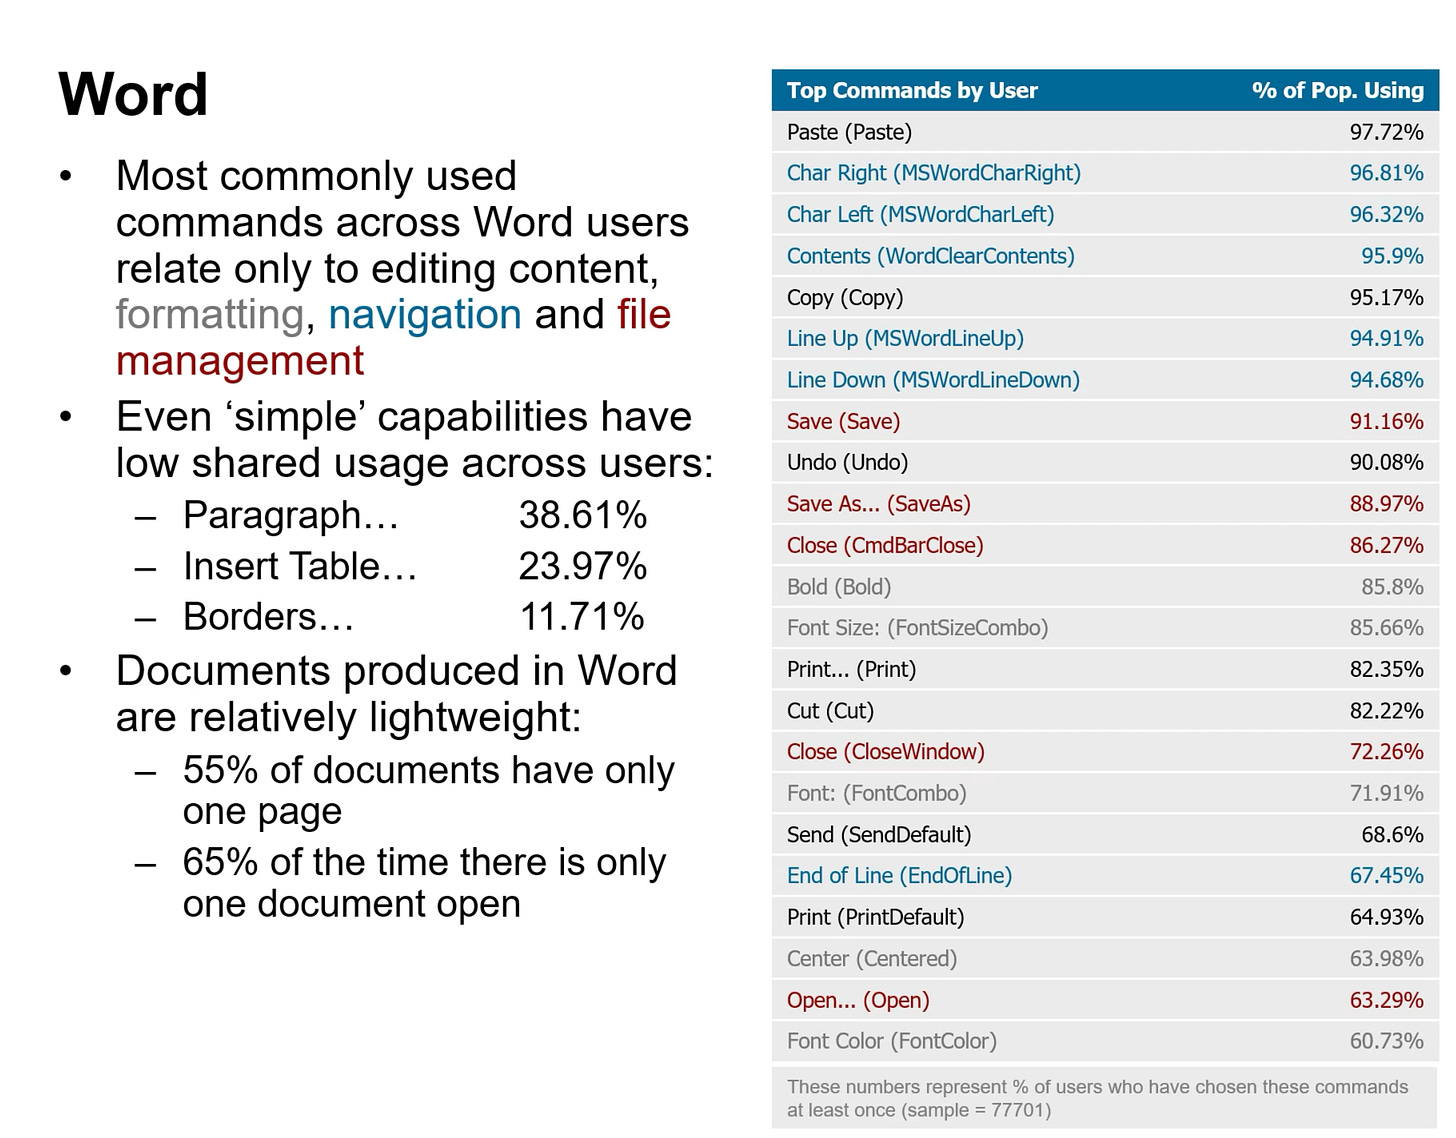 Word Most commonly used commands across Word users relate only to editing content, formatting, navigation and file management Even 'simple' capabilities have low shared usage across users: Paragraph. 38.61% Insert Table. 23.97% Borders. 11.71% Documents produced in Word are relatively lightweight: 55% of documents have only one page 65% of the time there is only one document open